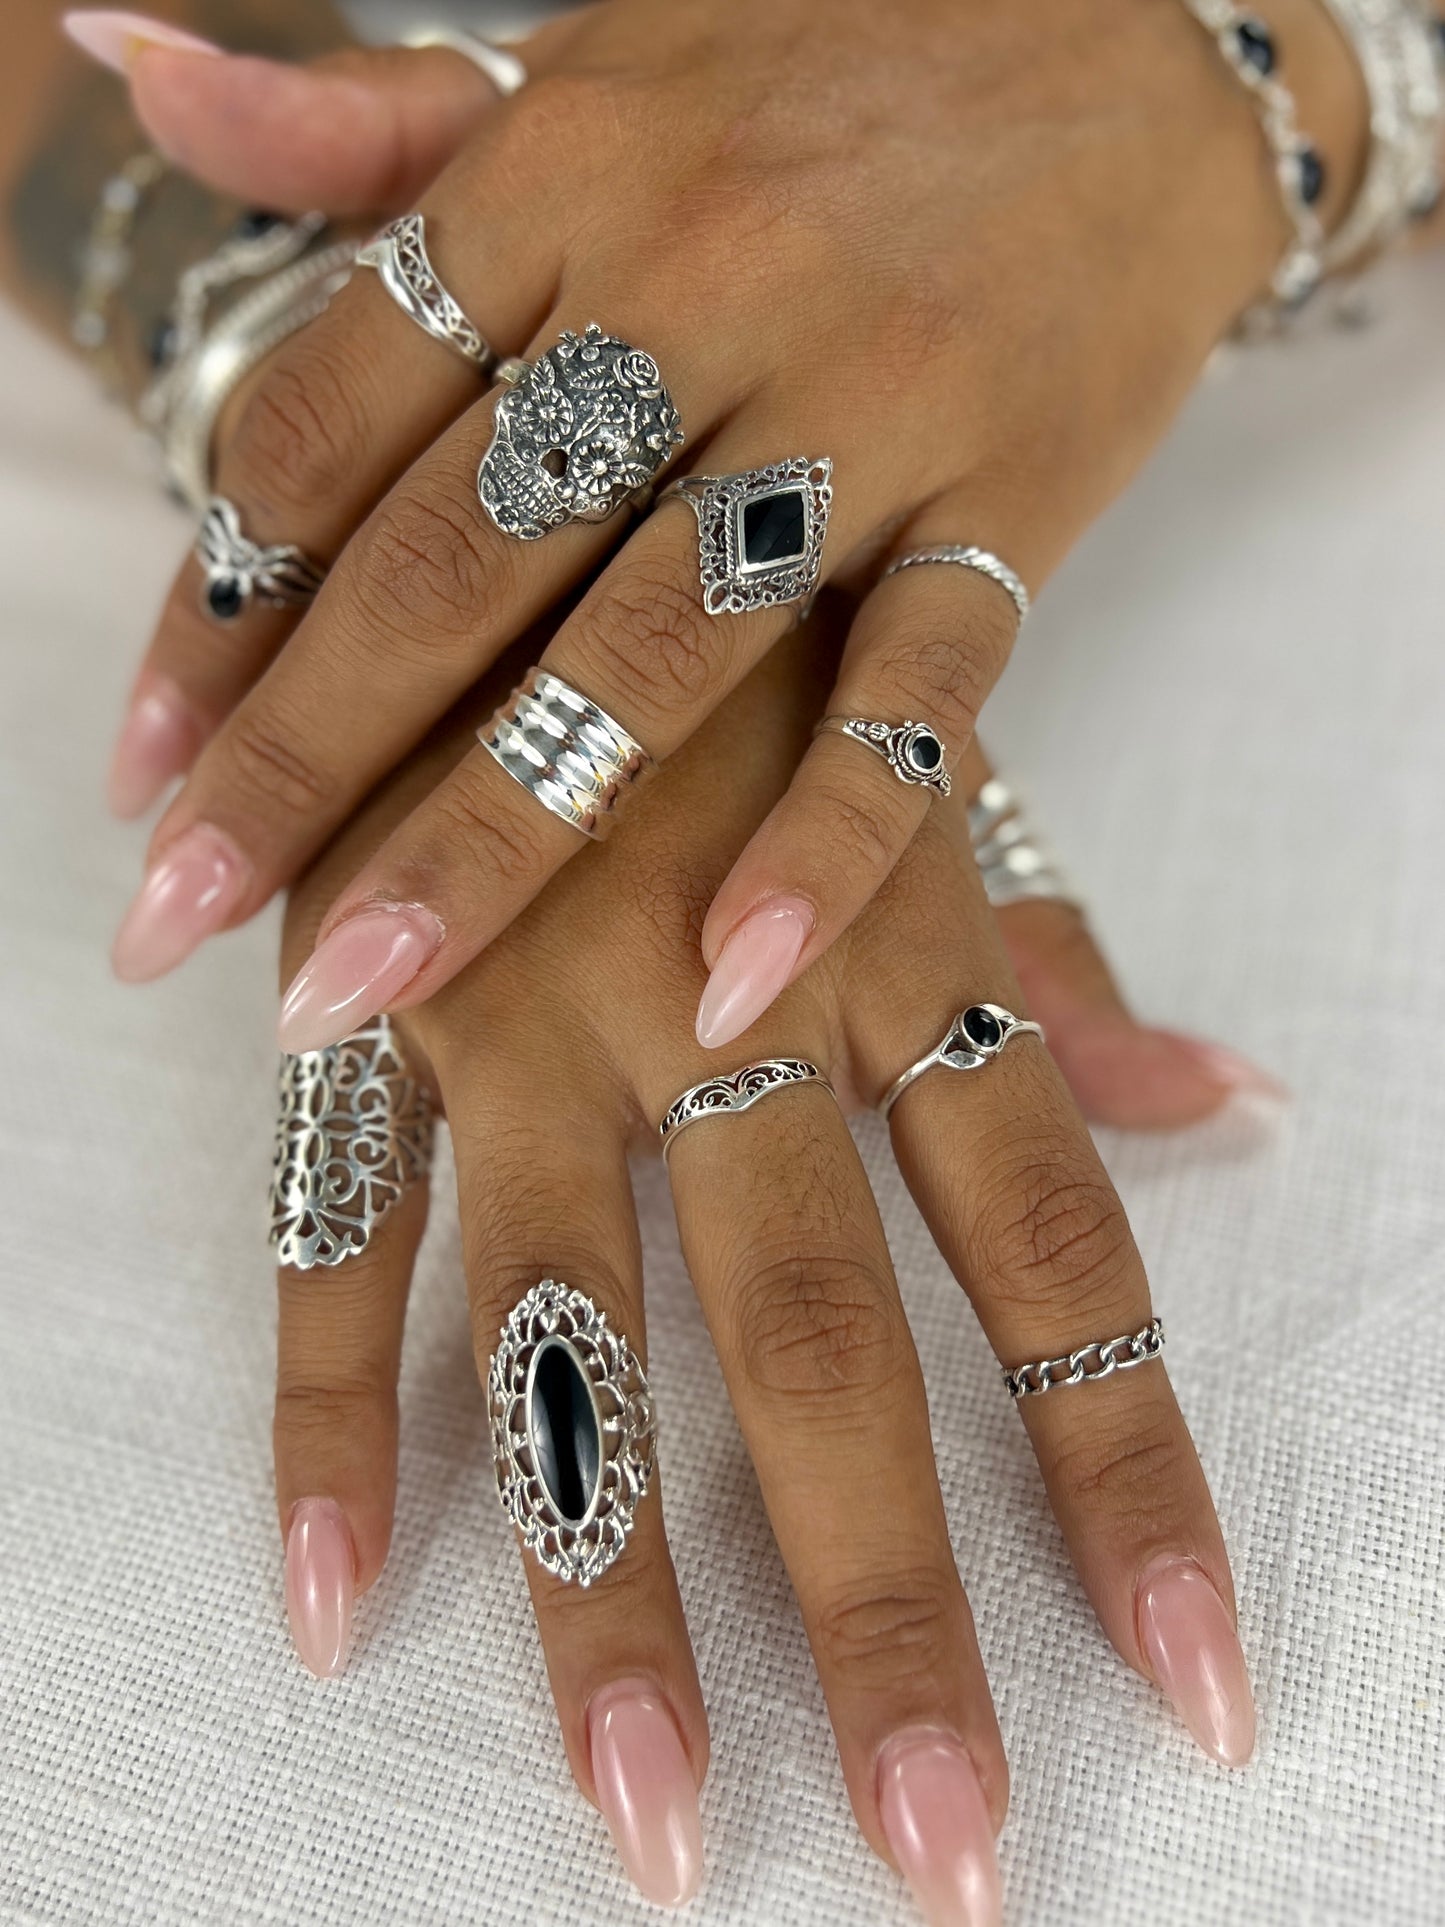 
                  
                    A woman's hands adorned with a Super Silver Diamond Shaped Filigree Ring with Inlaid Stones and a variety of rings, including lacy filigree and midi-rings.
                  
                